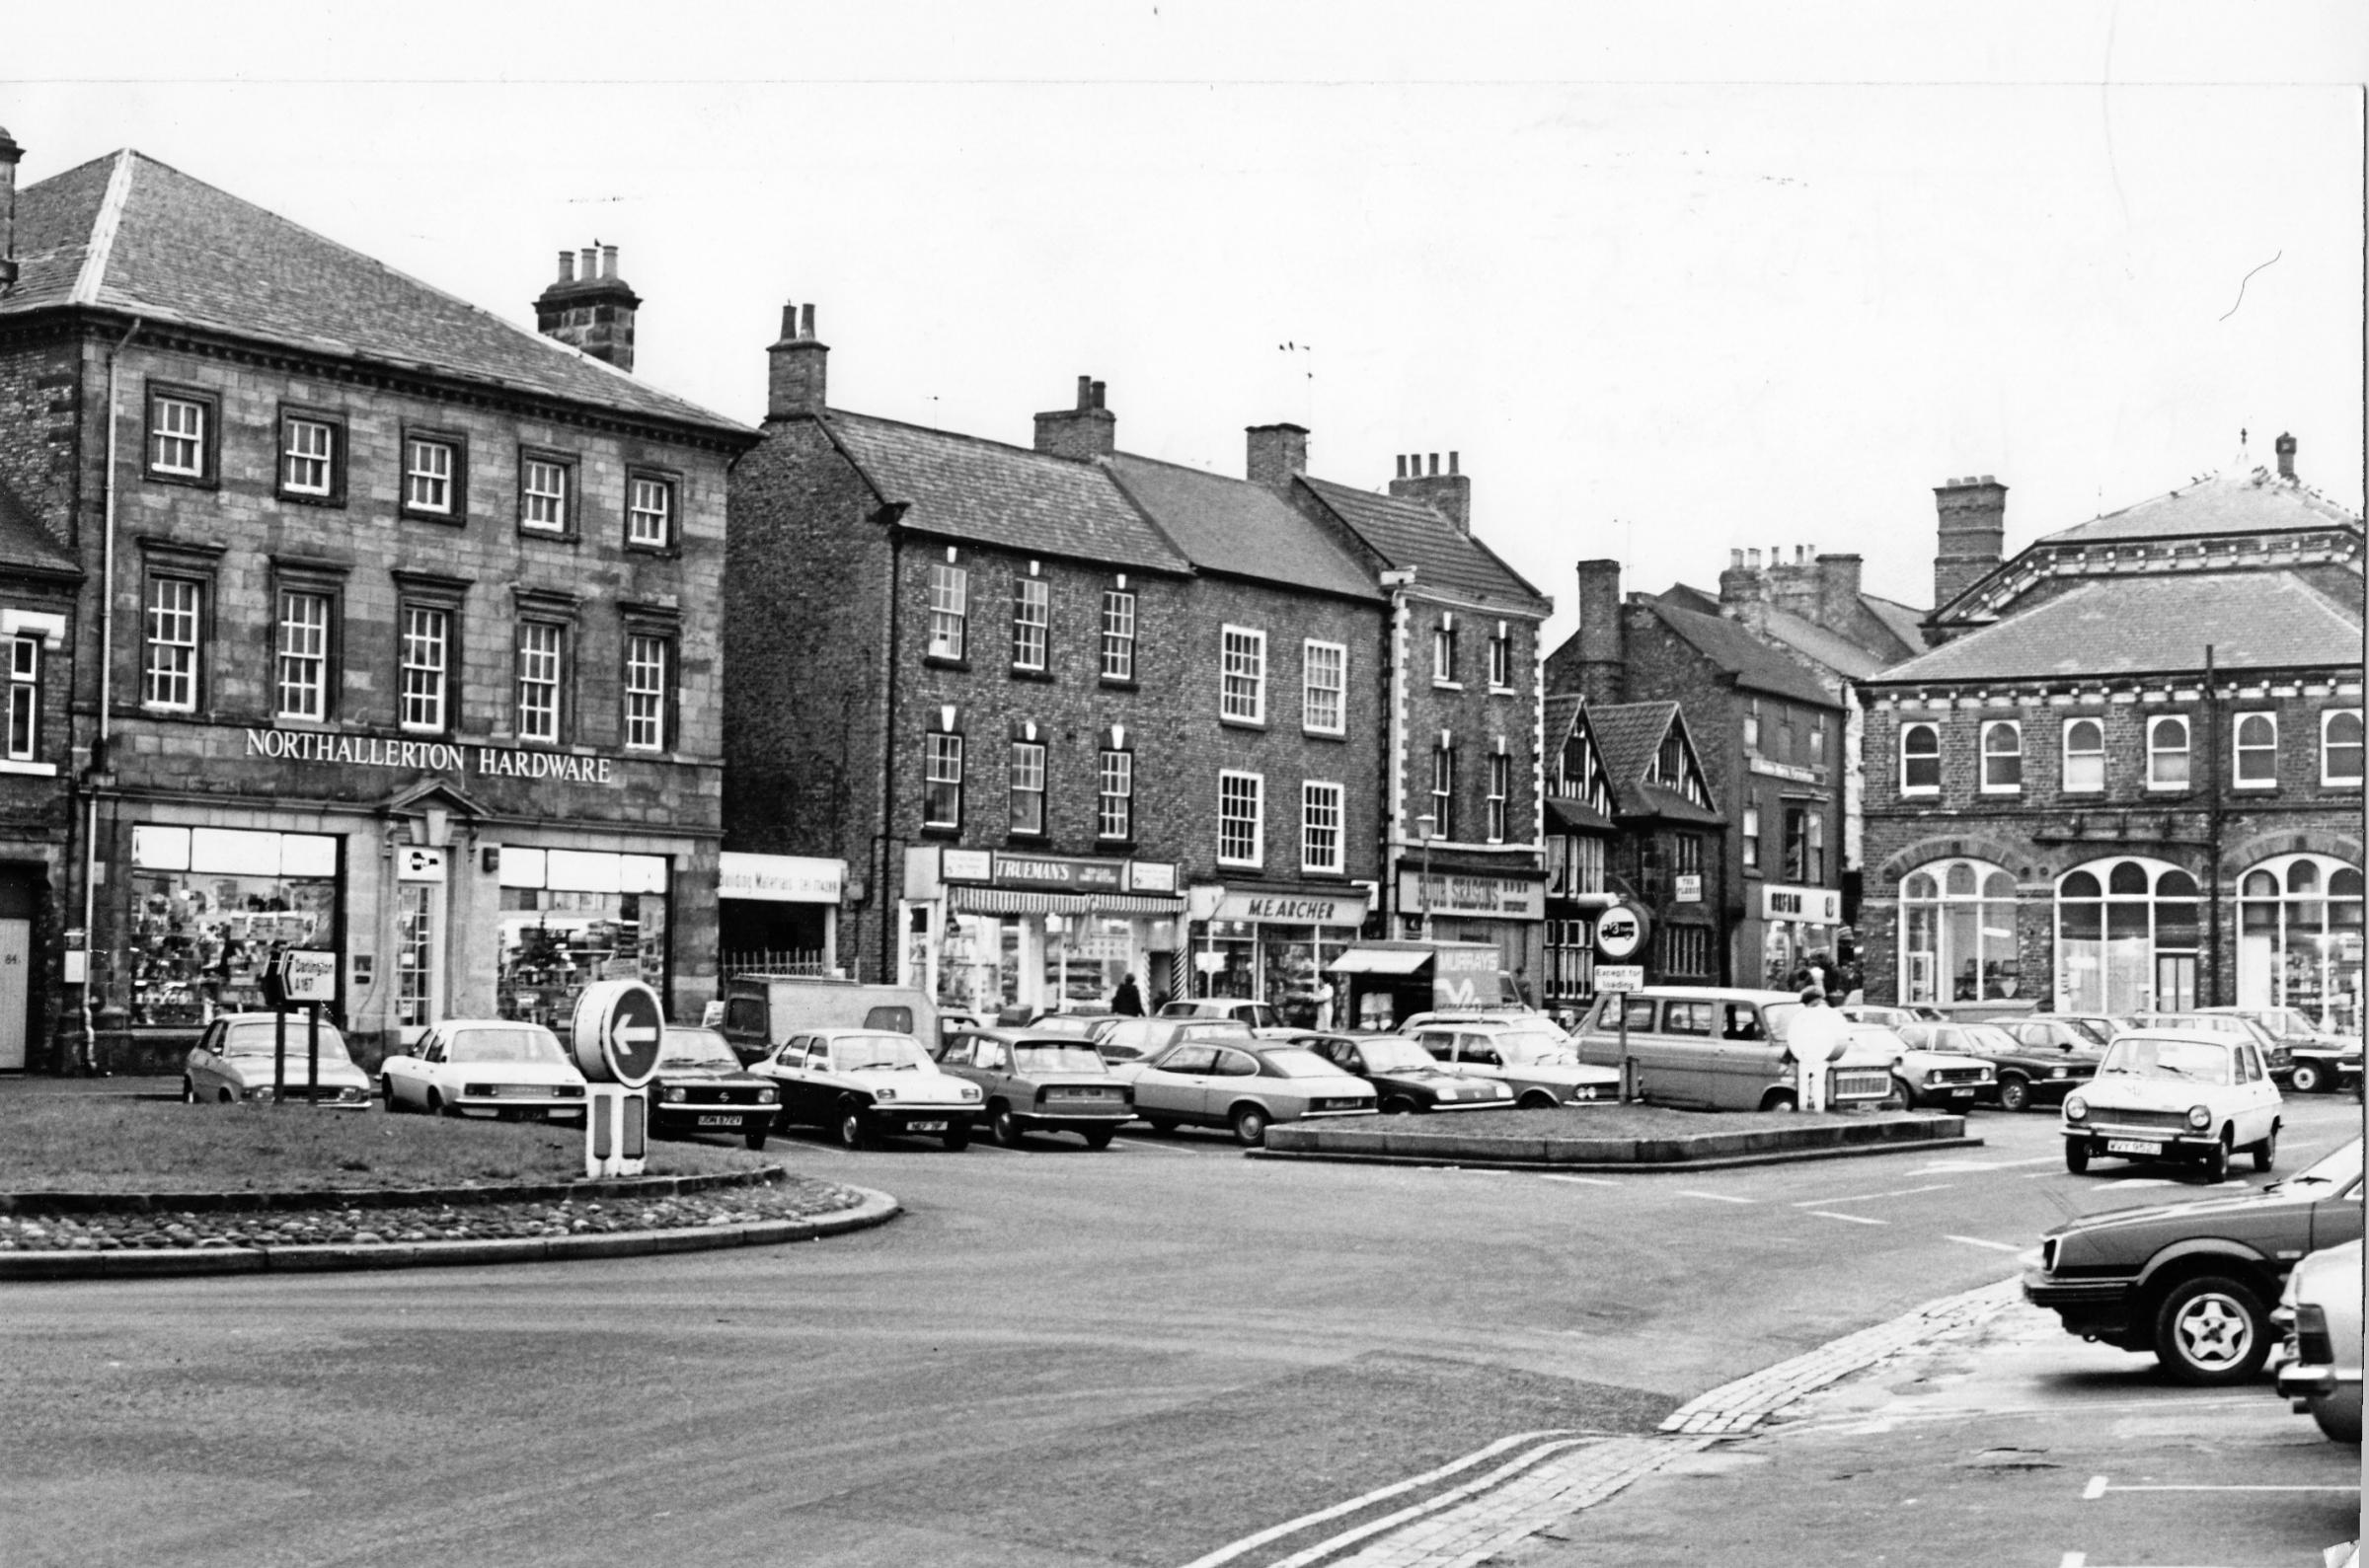 Northallerton High Street in December 1980, with the splendid Durham House on the left occupied by Northallerton Hardware. The entrance to the Metropole garage can be seen to the right of Durham House